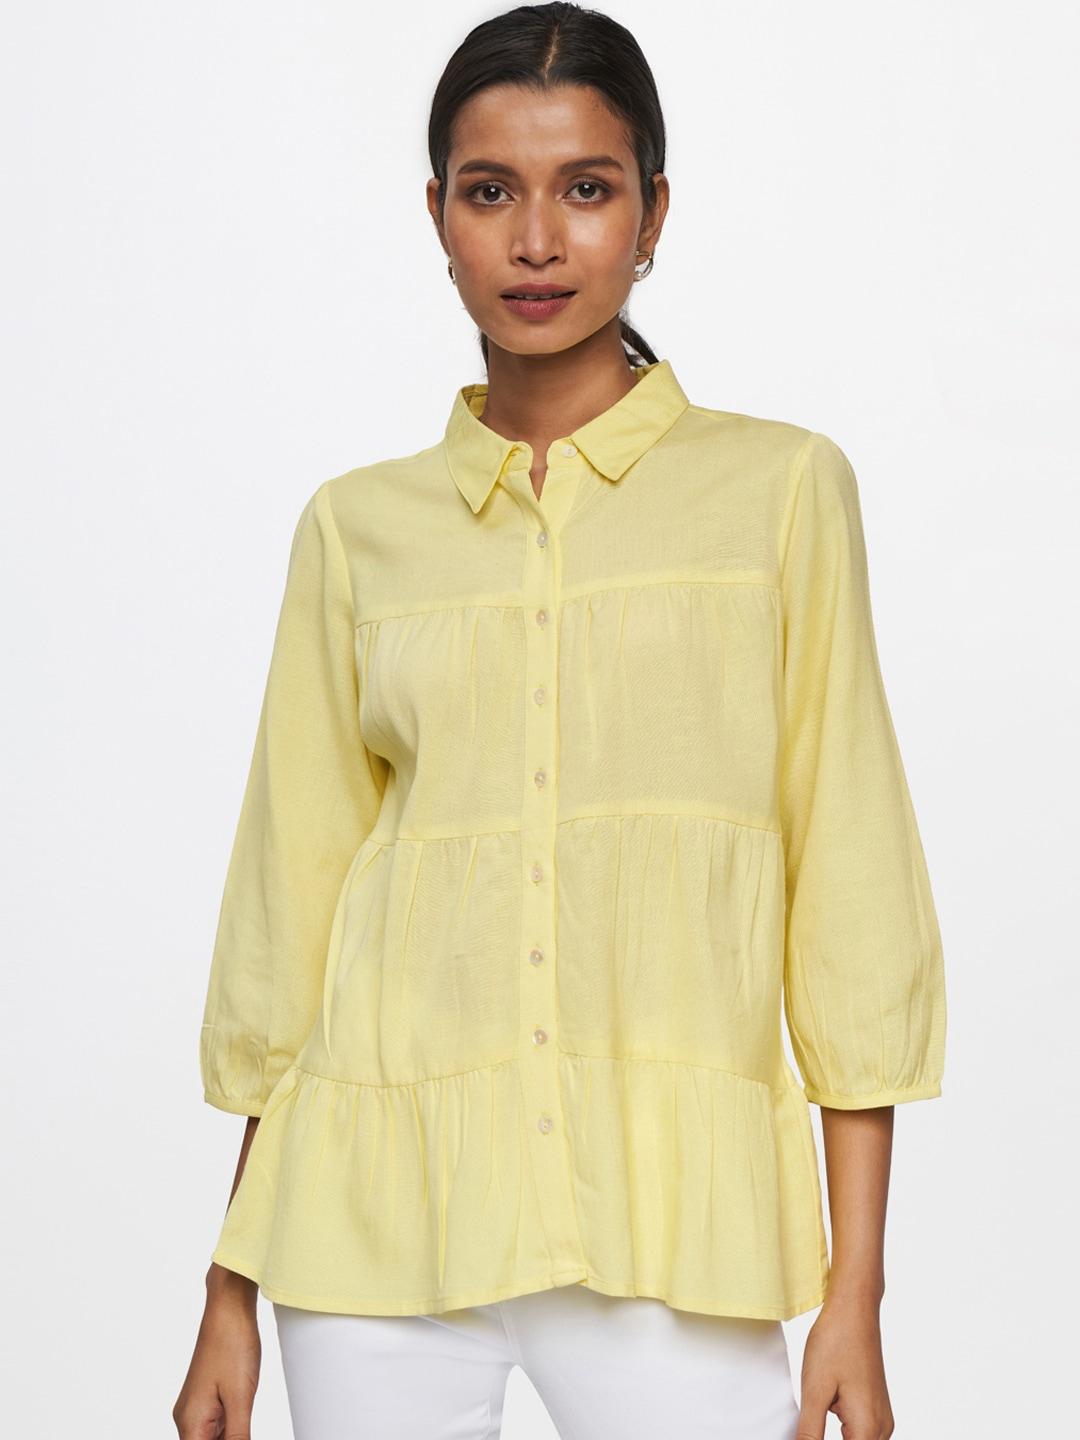 and yellow shirt style top